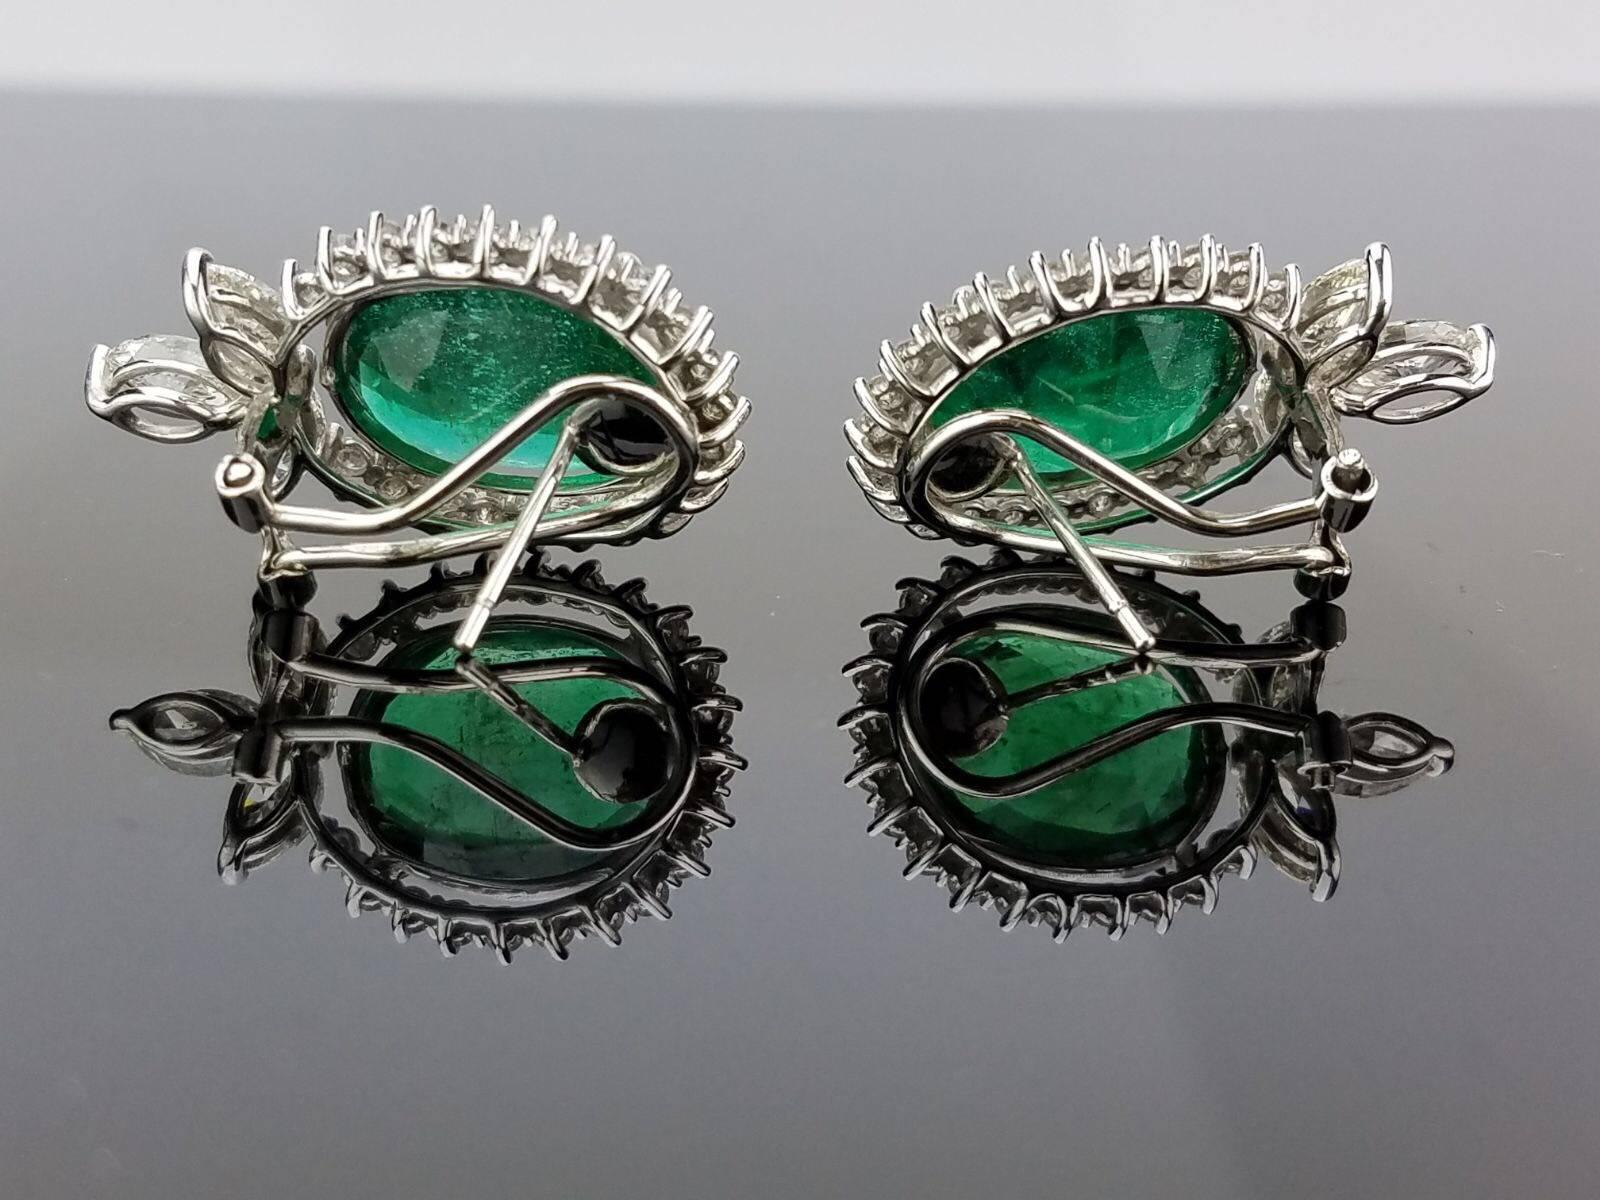 A very elegant pair of earrings, using high-quality Zambian Emerald of beautiful colour and White Diamond, all set in 18K white gold. 

Stone Details: 
Stone: Zambian Emerald
Carat Weight: 15.91 Carat

Diamond Details: (marquise and brilliant